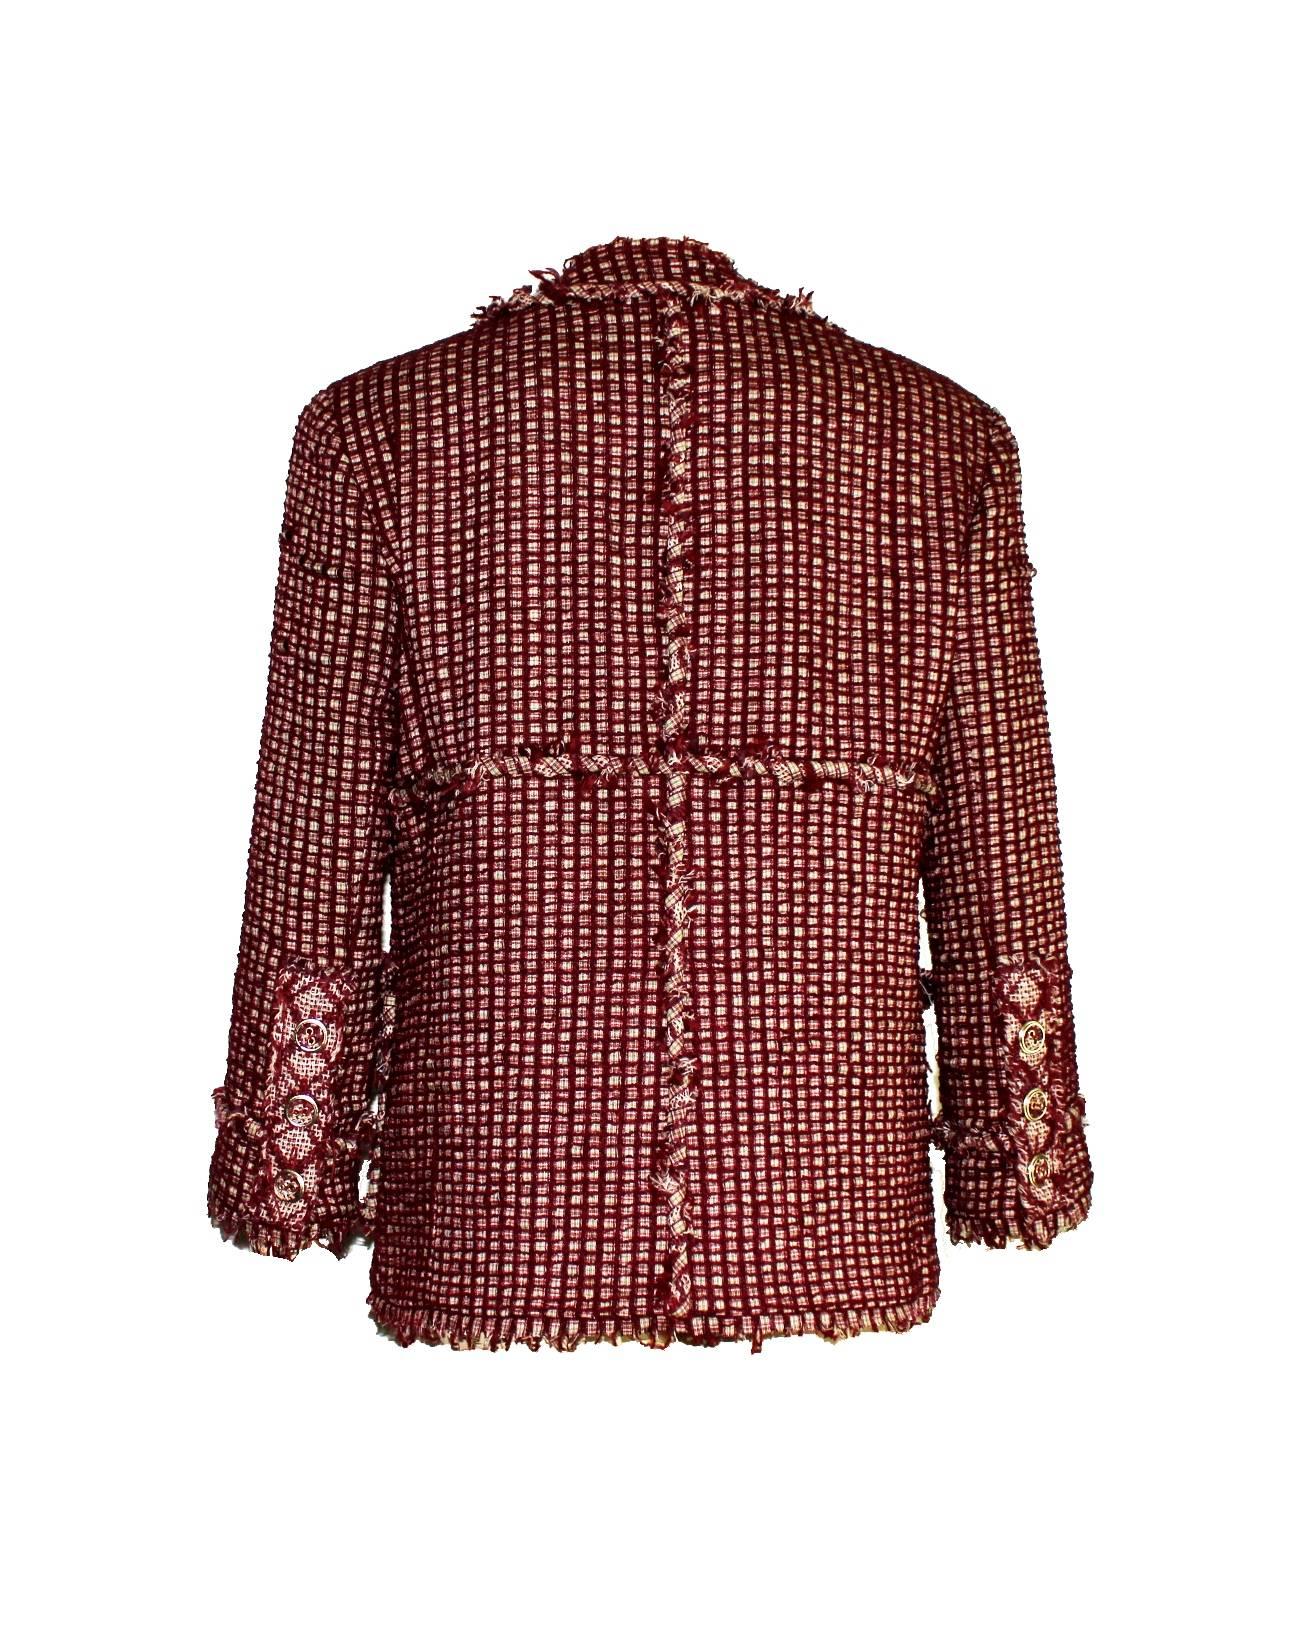 Beautiful Chanel Tweed Jacket

Designed By Karl Lagerfeld

A True Chanel Piece That Should Be In Every Woman'S Wardrobe

So Gorgeous

Details:

    Beautiful Chanel Jacket Designed By Karl Lagerfeld
    A True Signature Item That Will